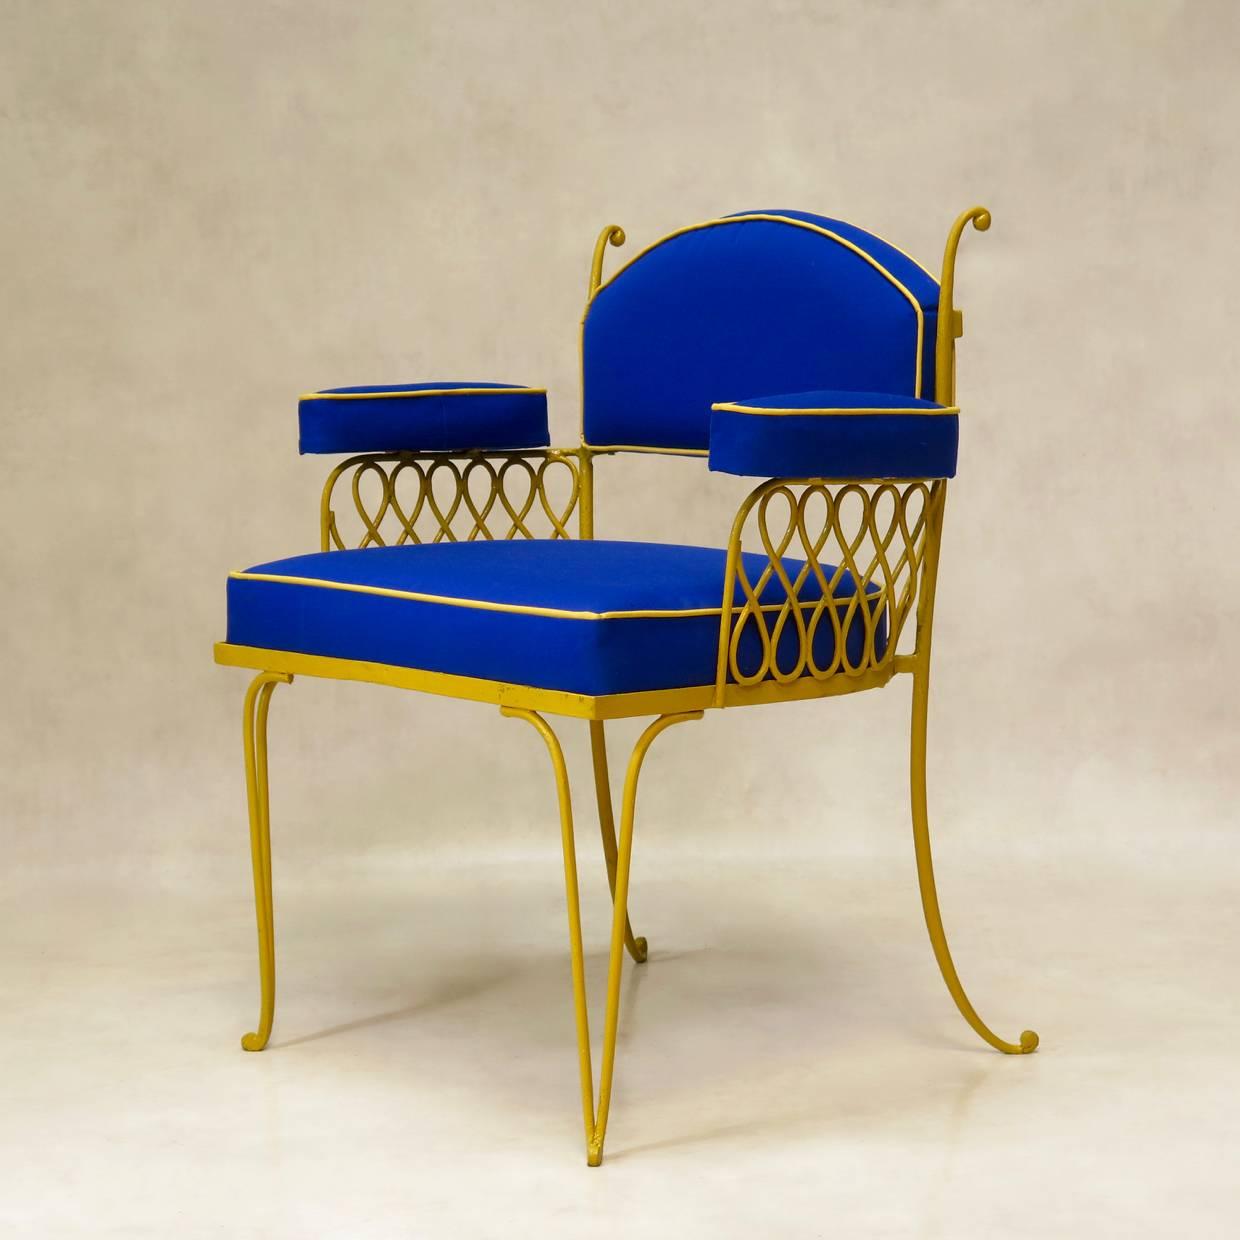 French Pair of Wrought Iron Art Deco Chairs by René Prou, France, 1940s